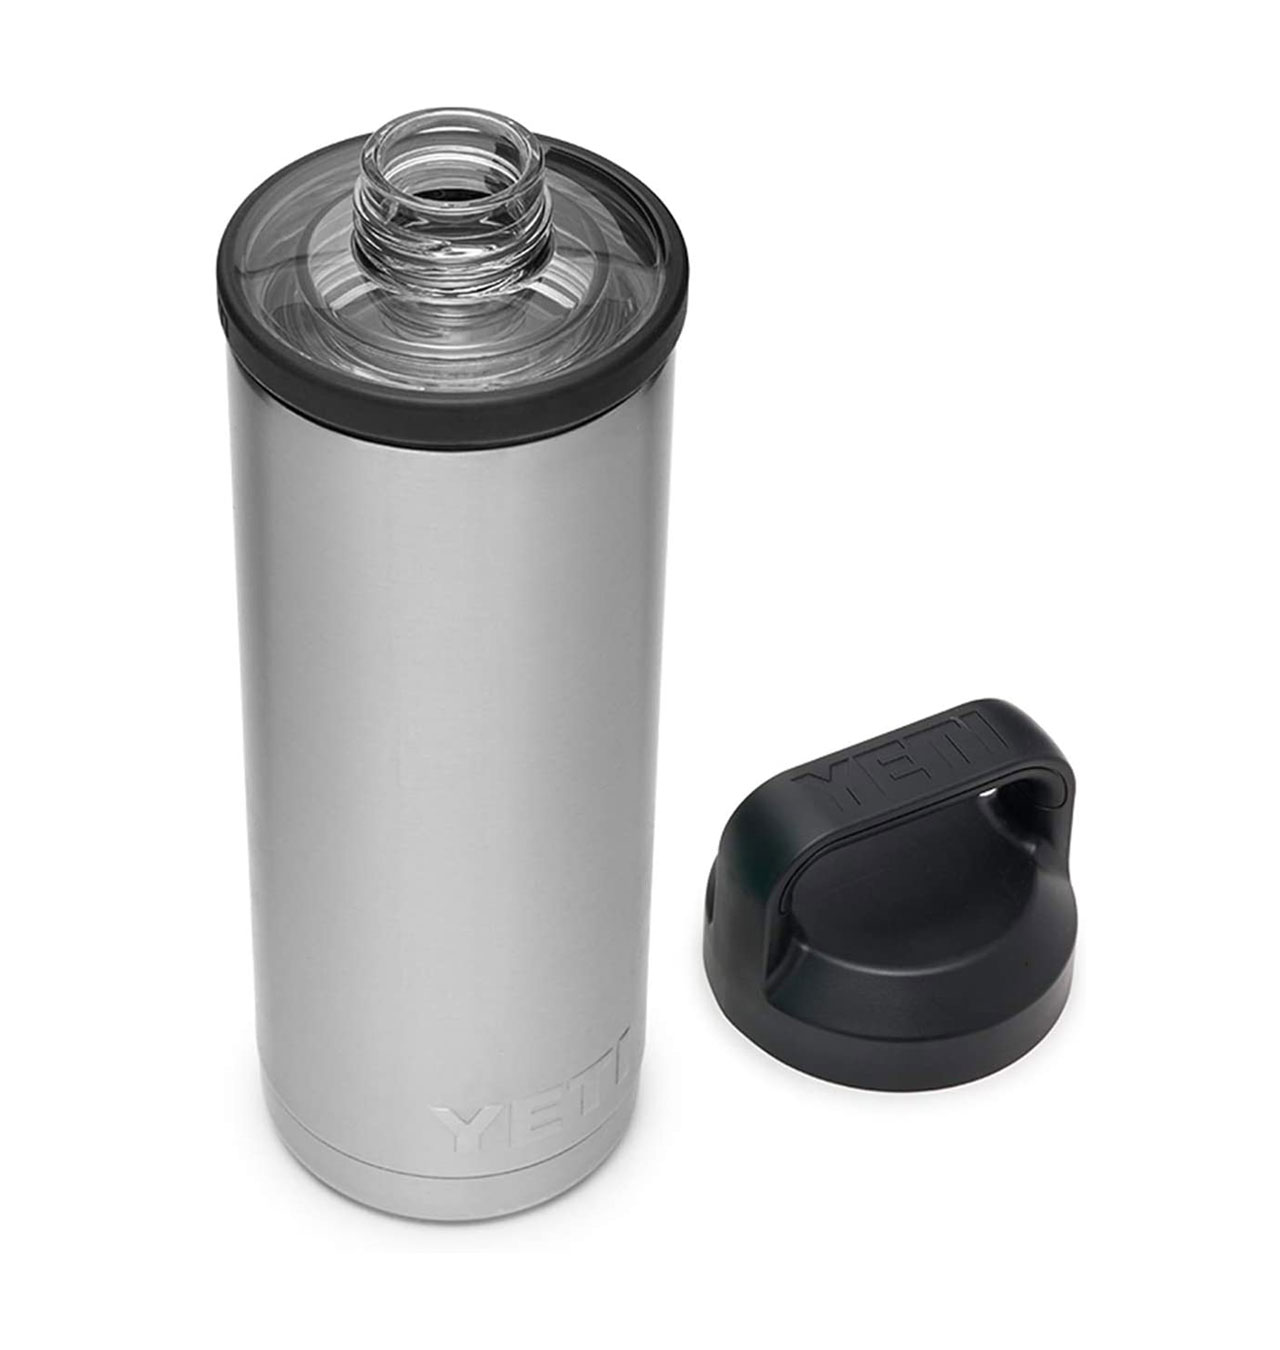 Yeti - Rambler 18 oz Bottle with Chug Cap - Stainless Steal